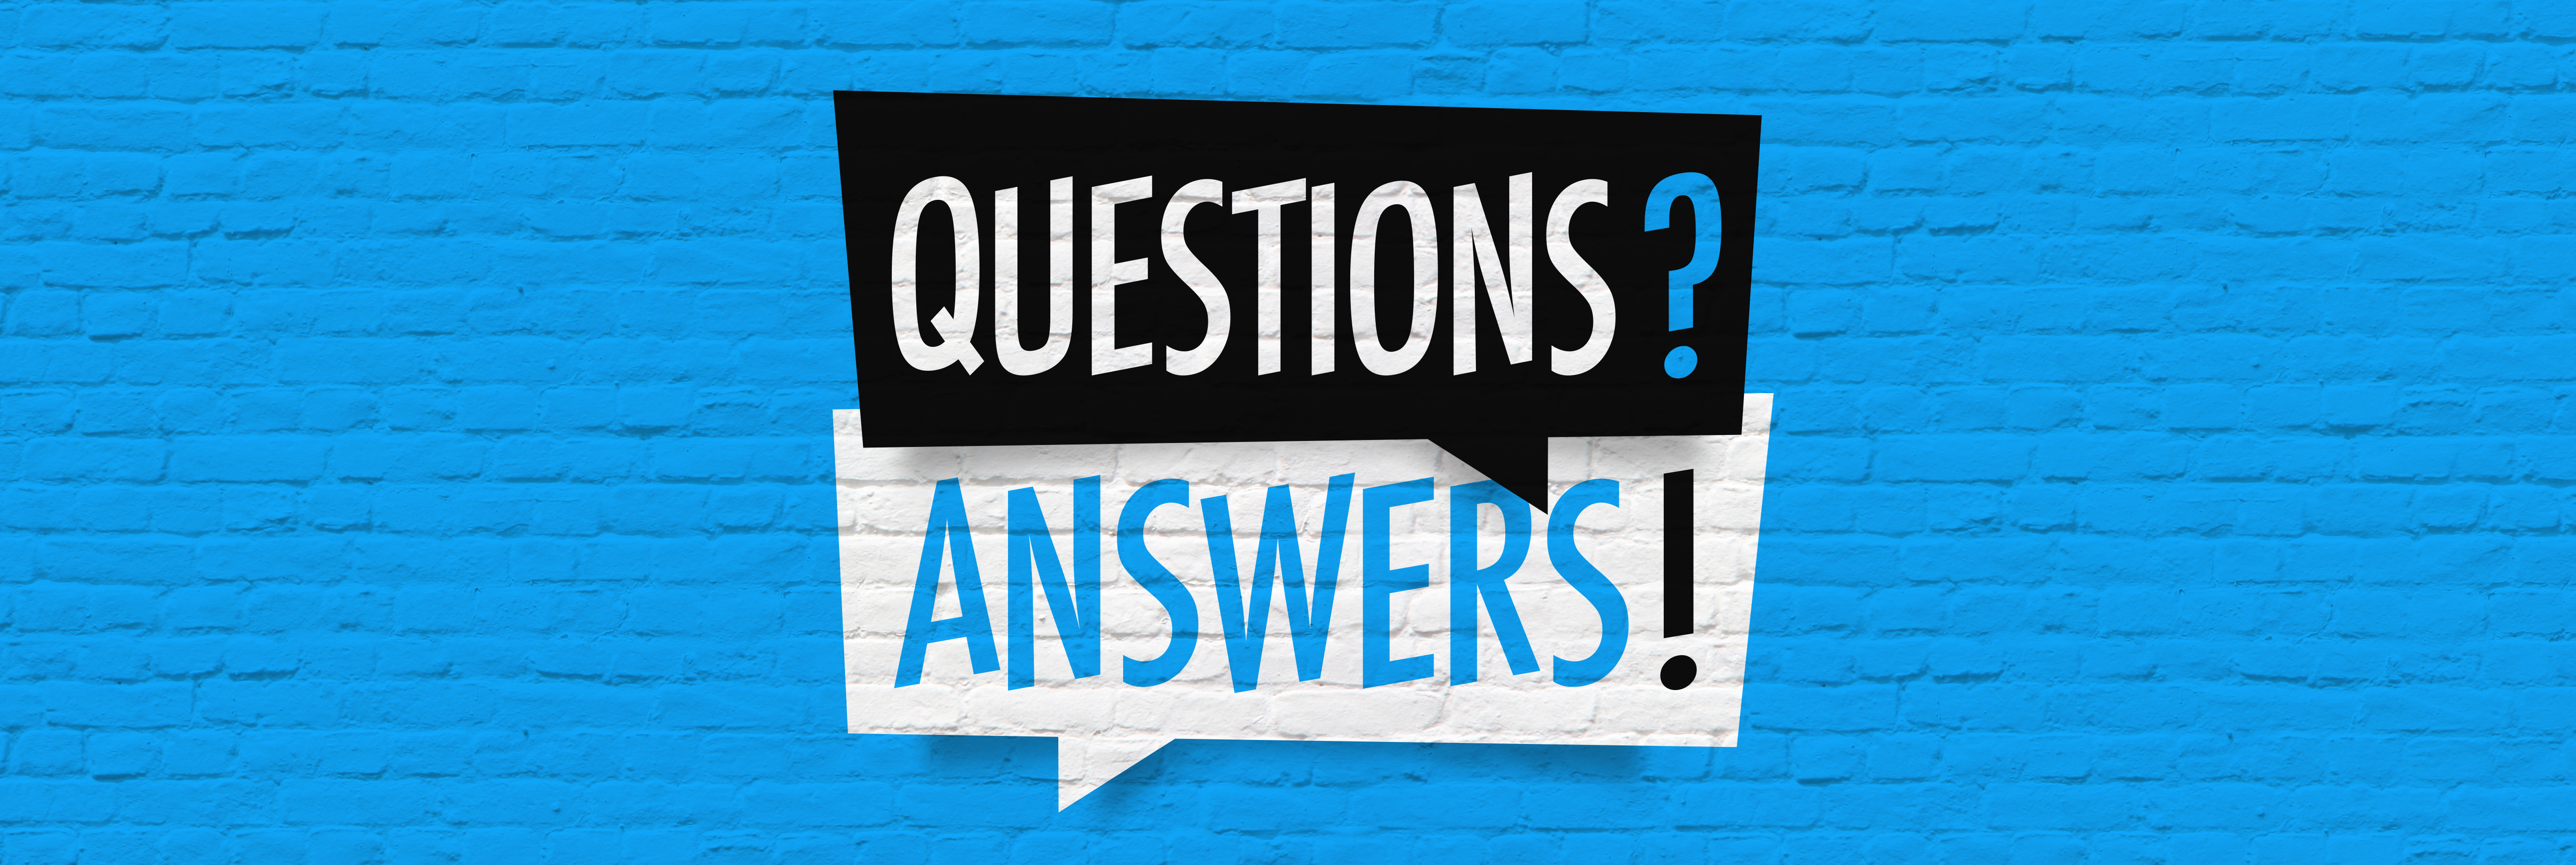 Questions and Answers Banner - Blue White and Black 